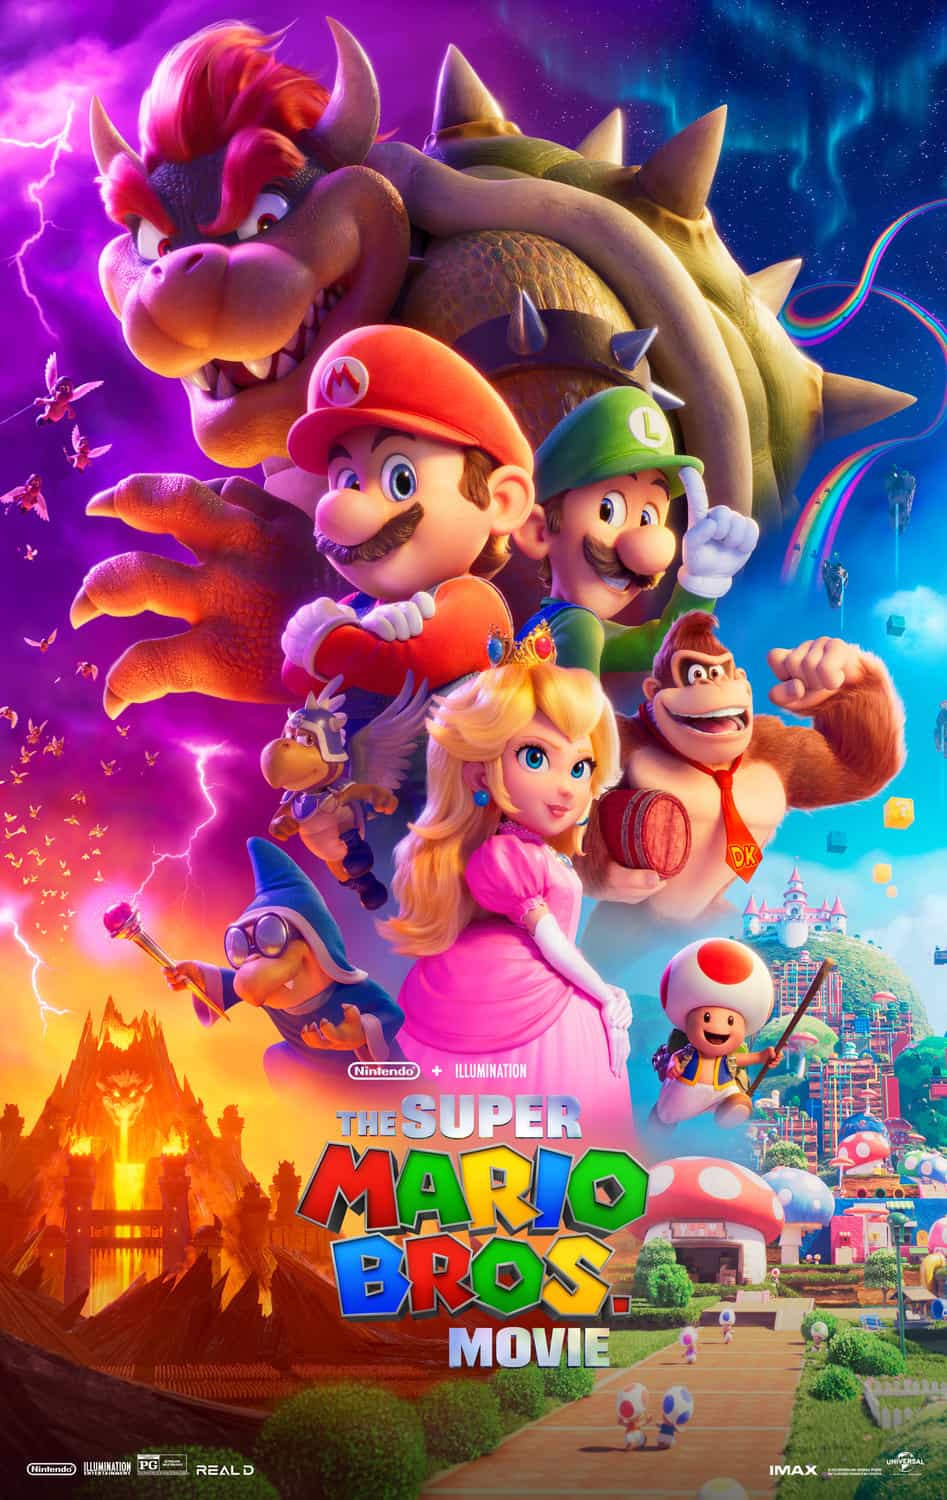 New poster released for Super Mario Bros.: The Movie ahead of the first trailer releasing on Thursday. #supermariobrosthemovie